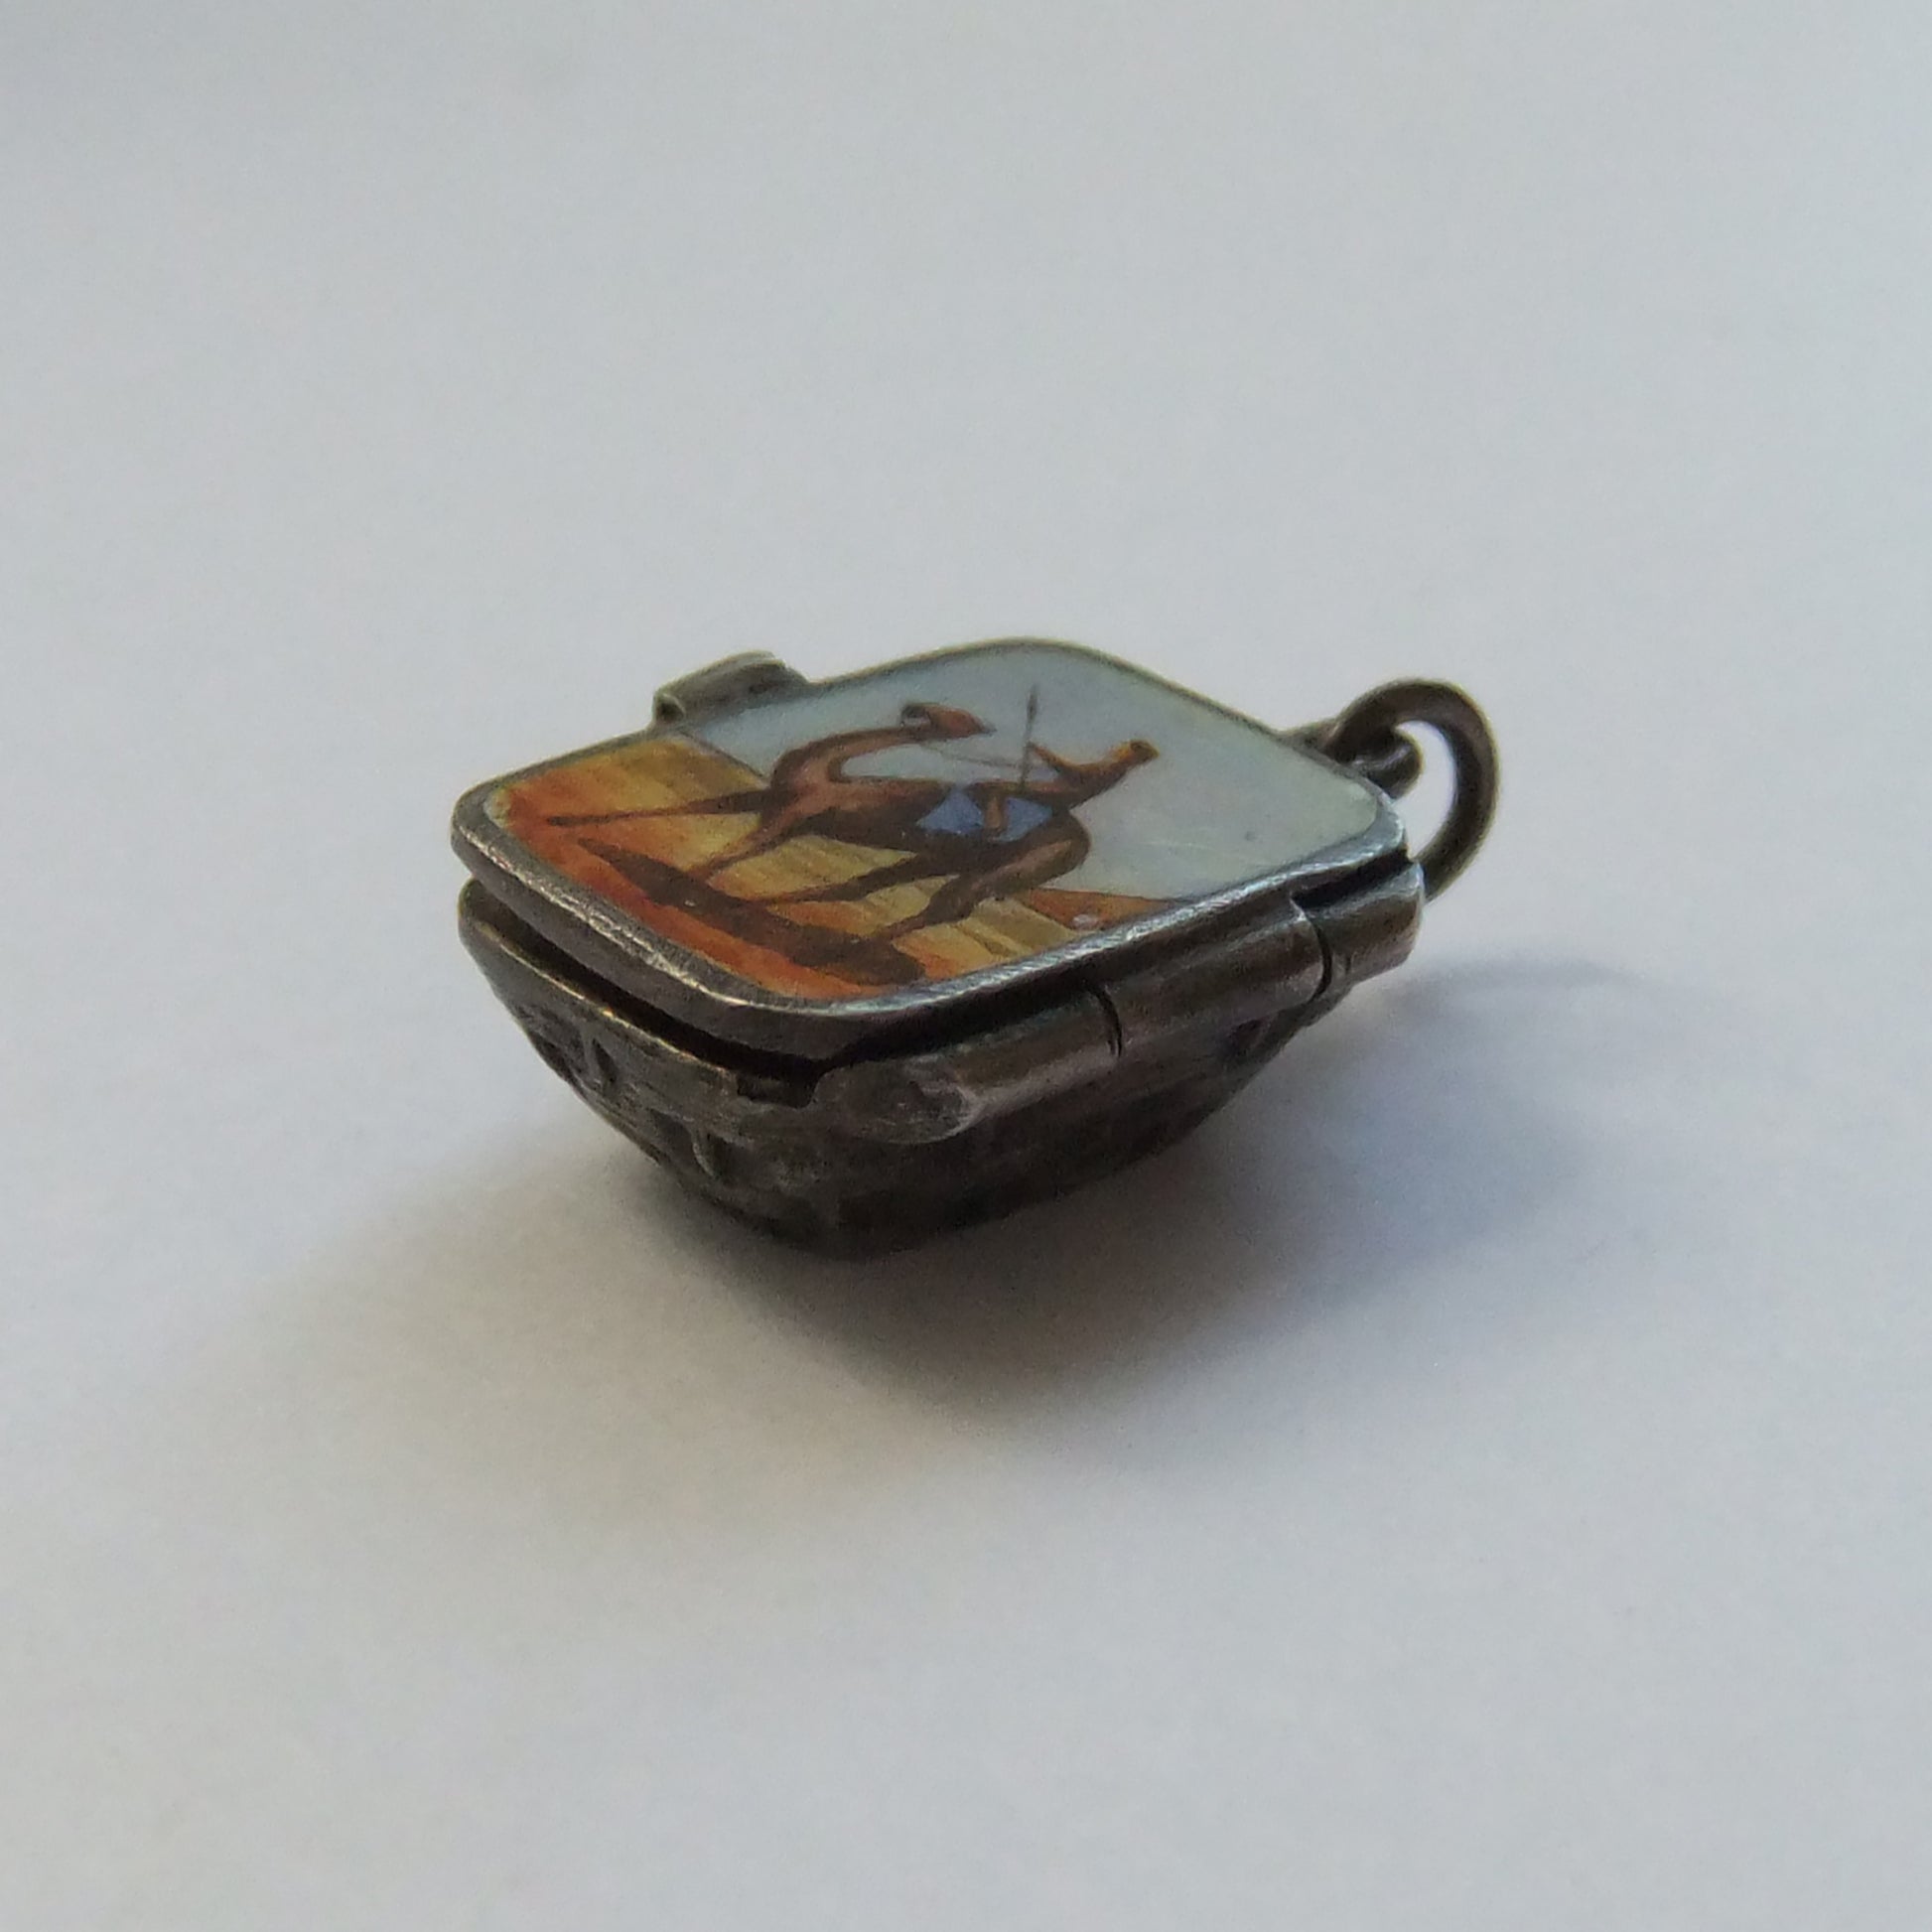 Rare Antique Enamel Egyptian Basket Charm with Baby